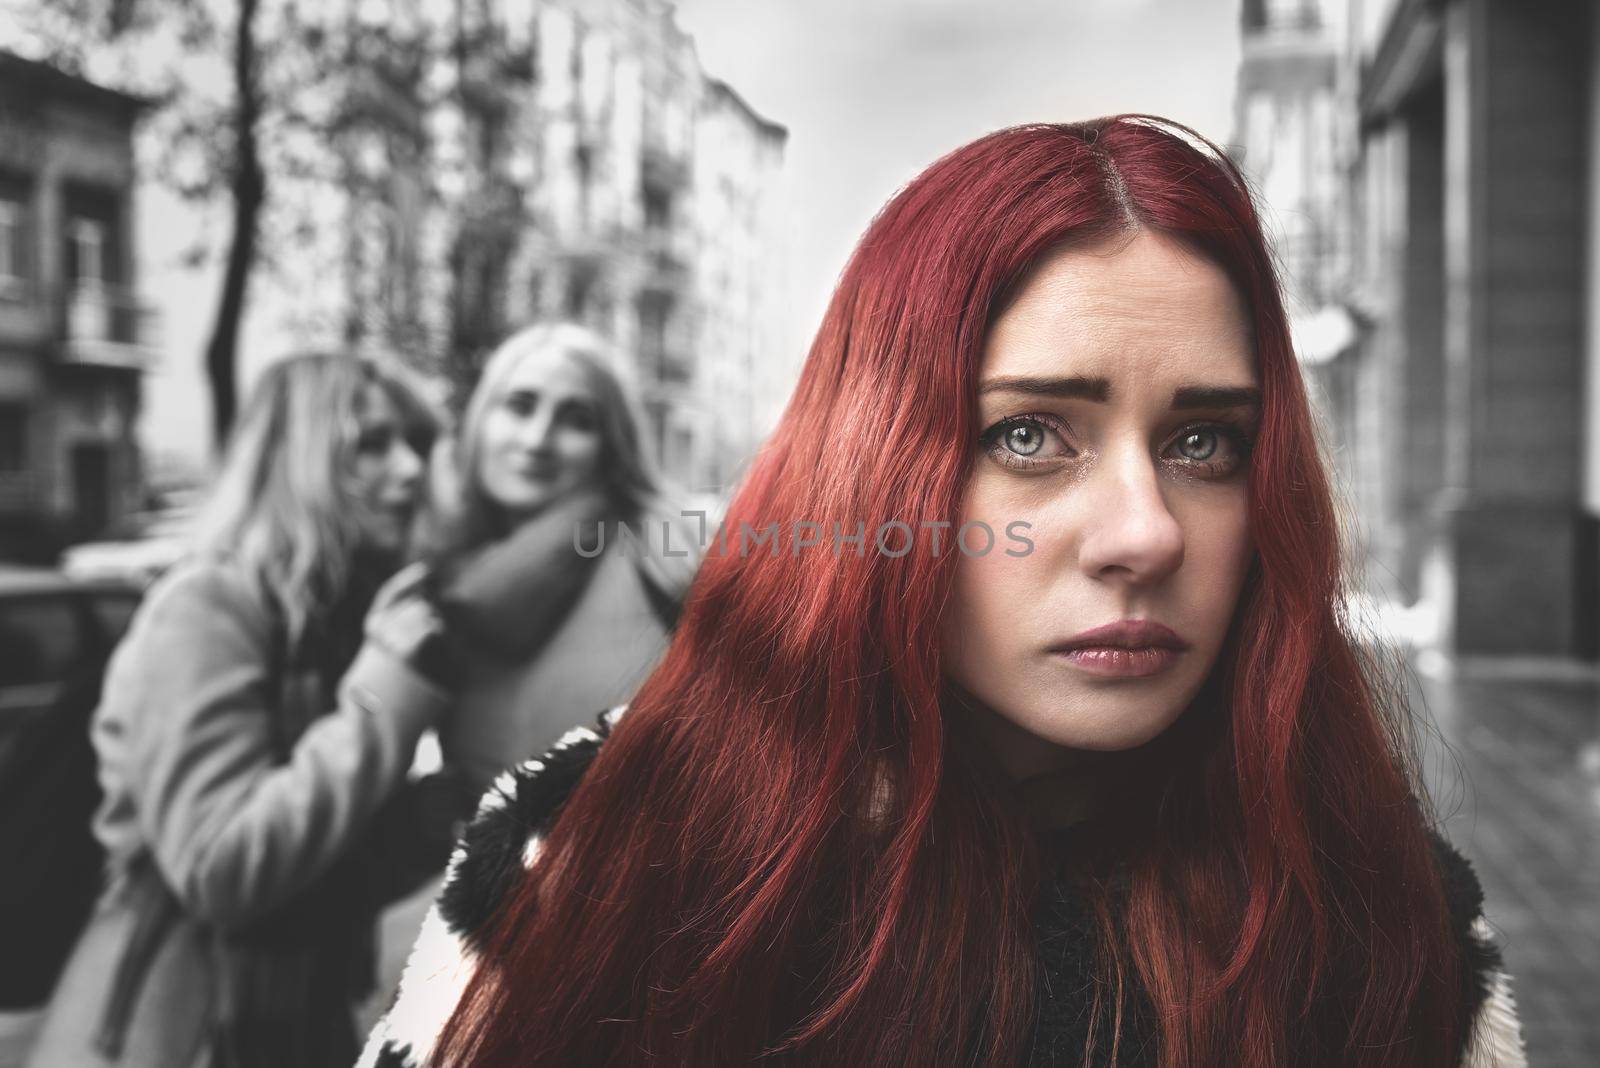 a young depressed student girl with red hair who is bullied by her teenage peers, disturbed by feelings of despair and suffering from oppression. social issues